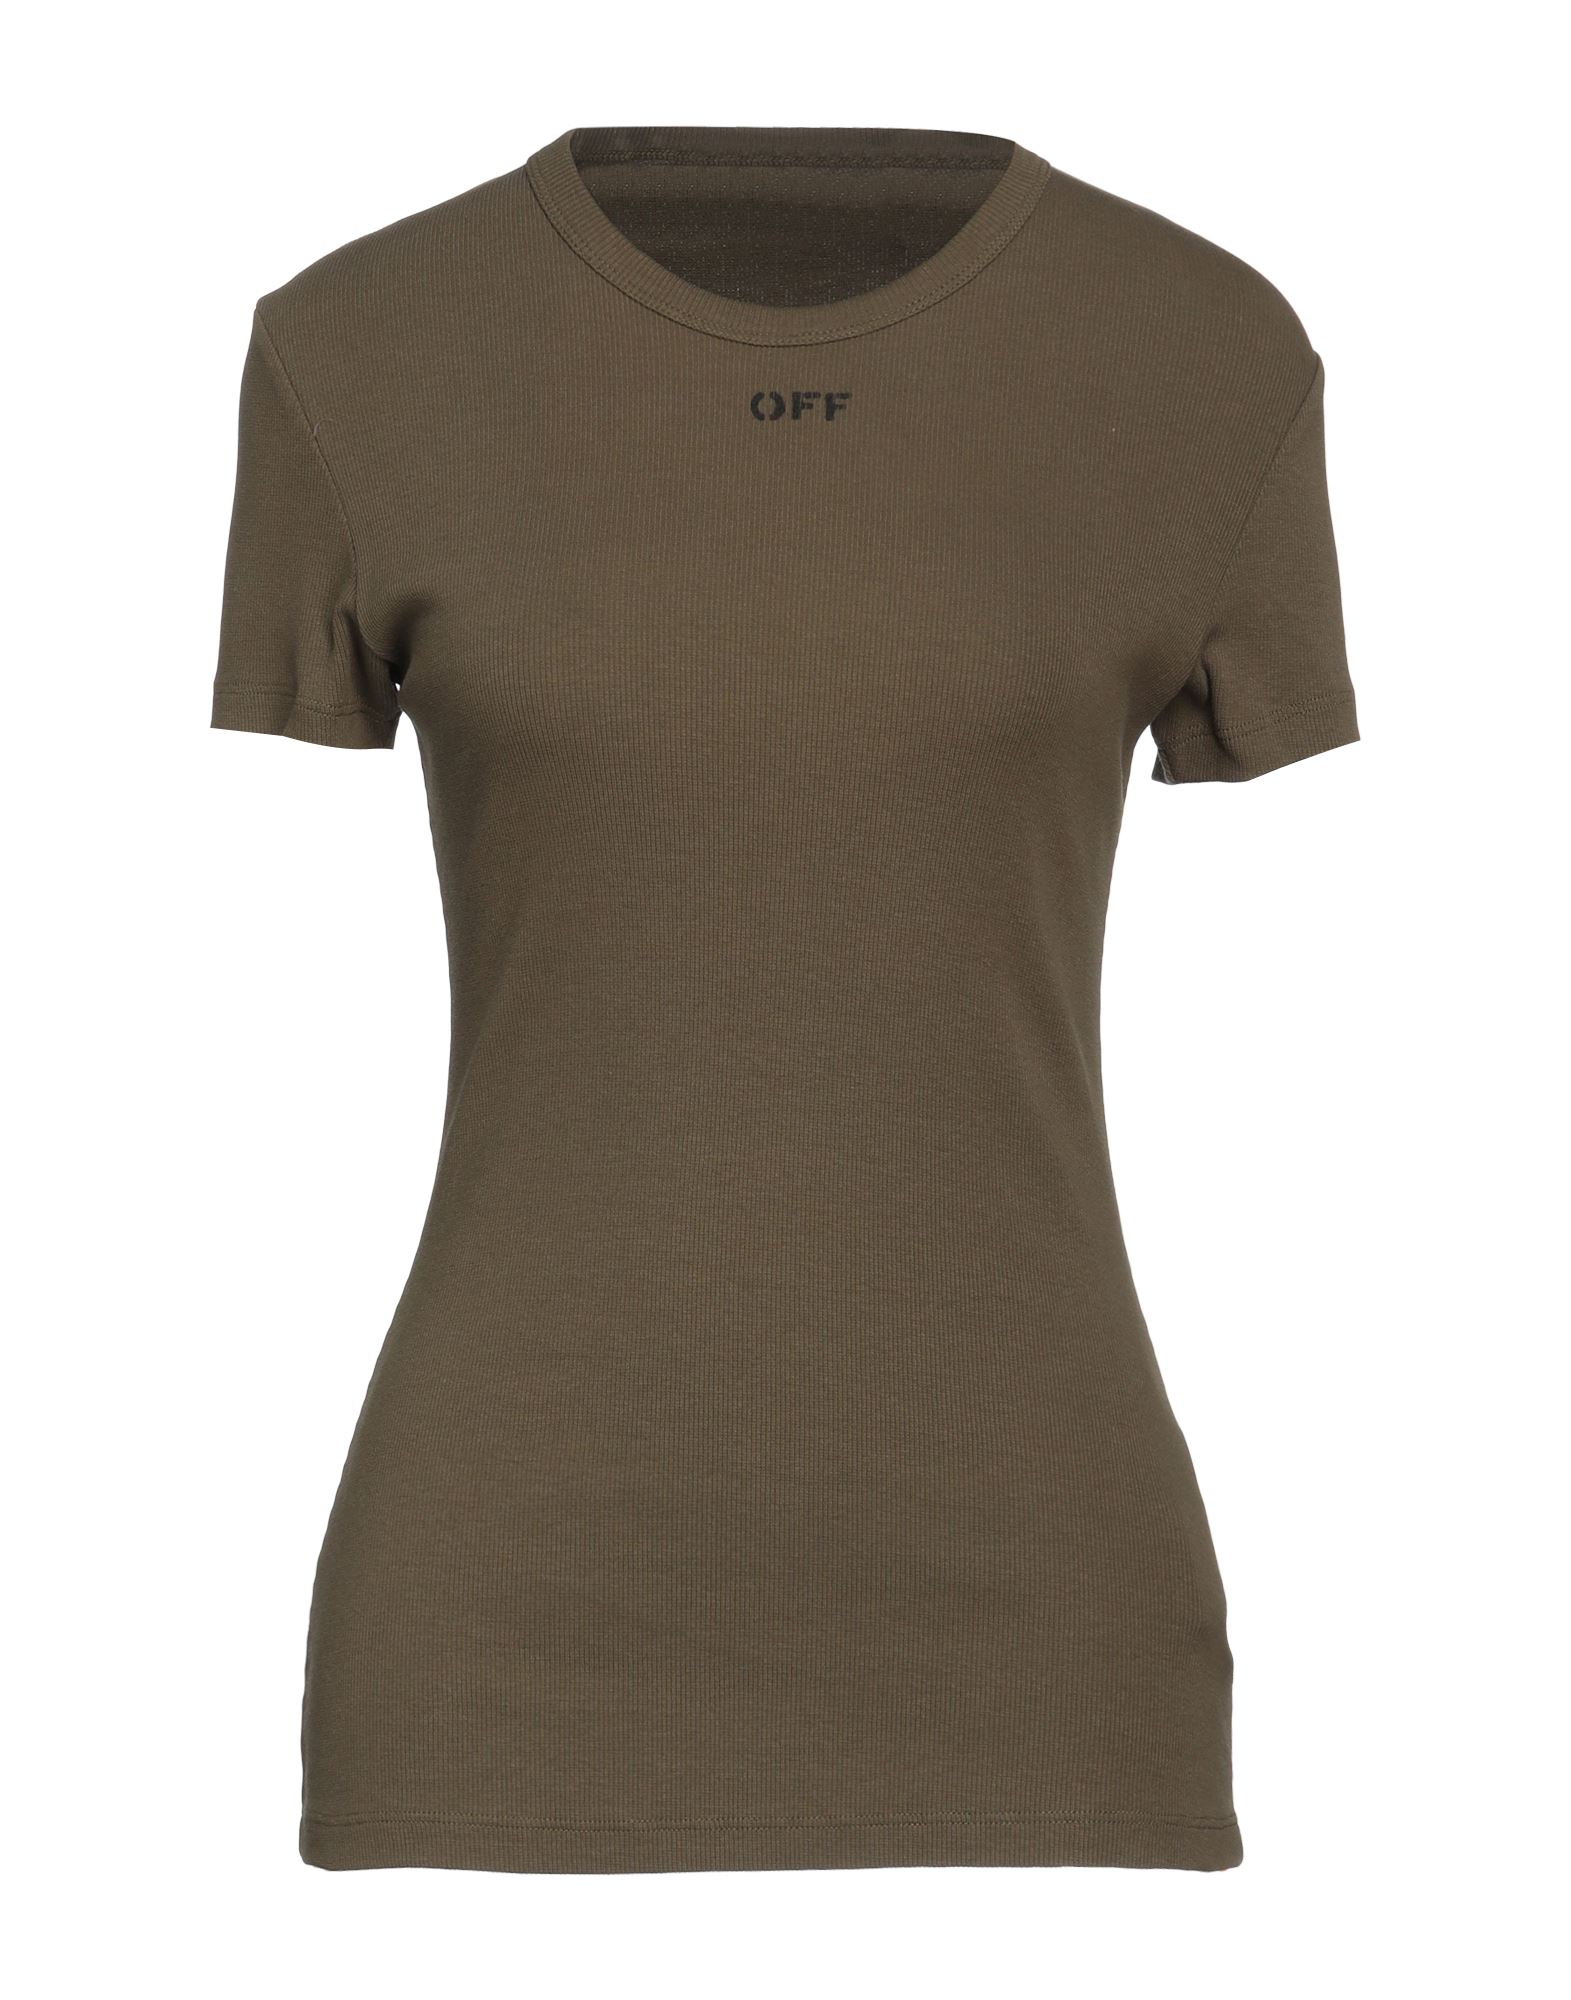 Off-white &trade; T-shirts In Military Green